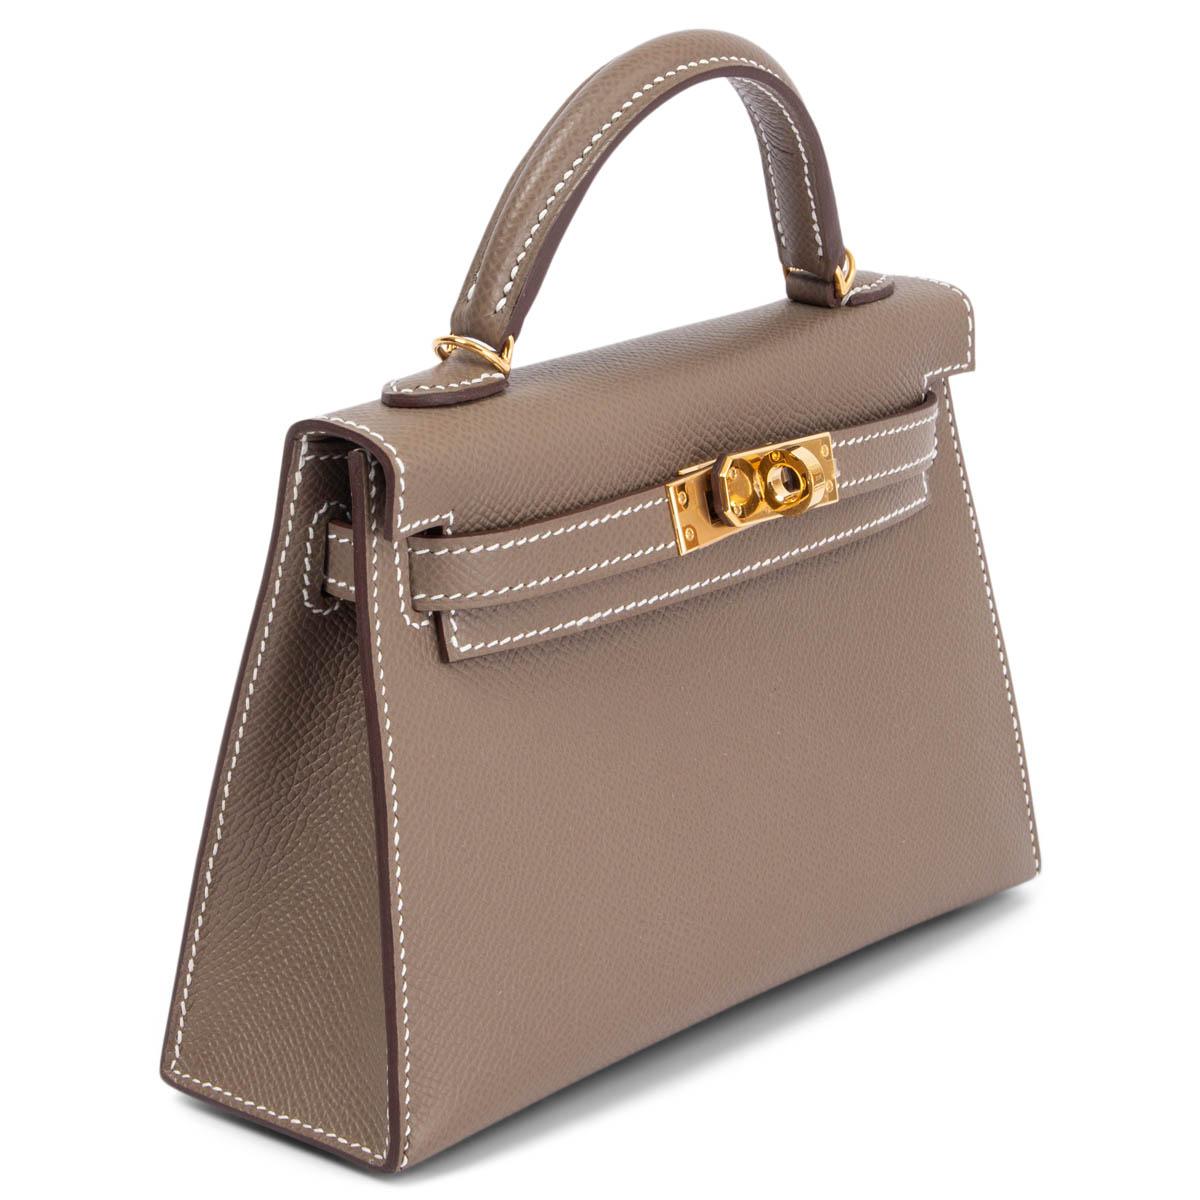 100% authentic Hermès Mini Kelly 20 Sellier bag in Etoupe (taupe) Veau Epsom leather featuring gold-plated hardware. Lined in Chèvre (goat skin) with an open pocket against the back. Brand new - Full set. 

Measurements
Height	12cm